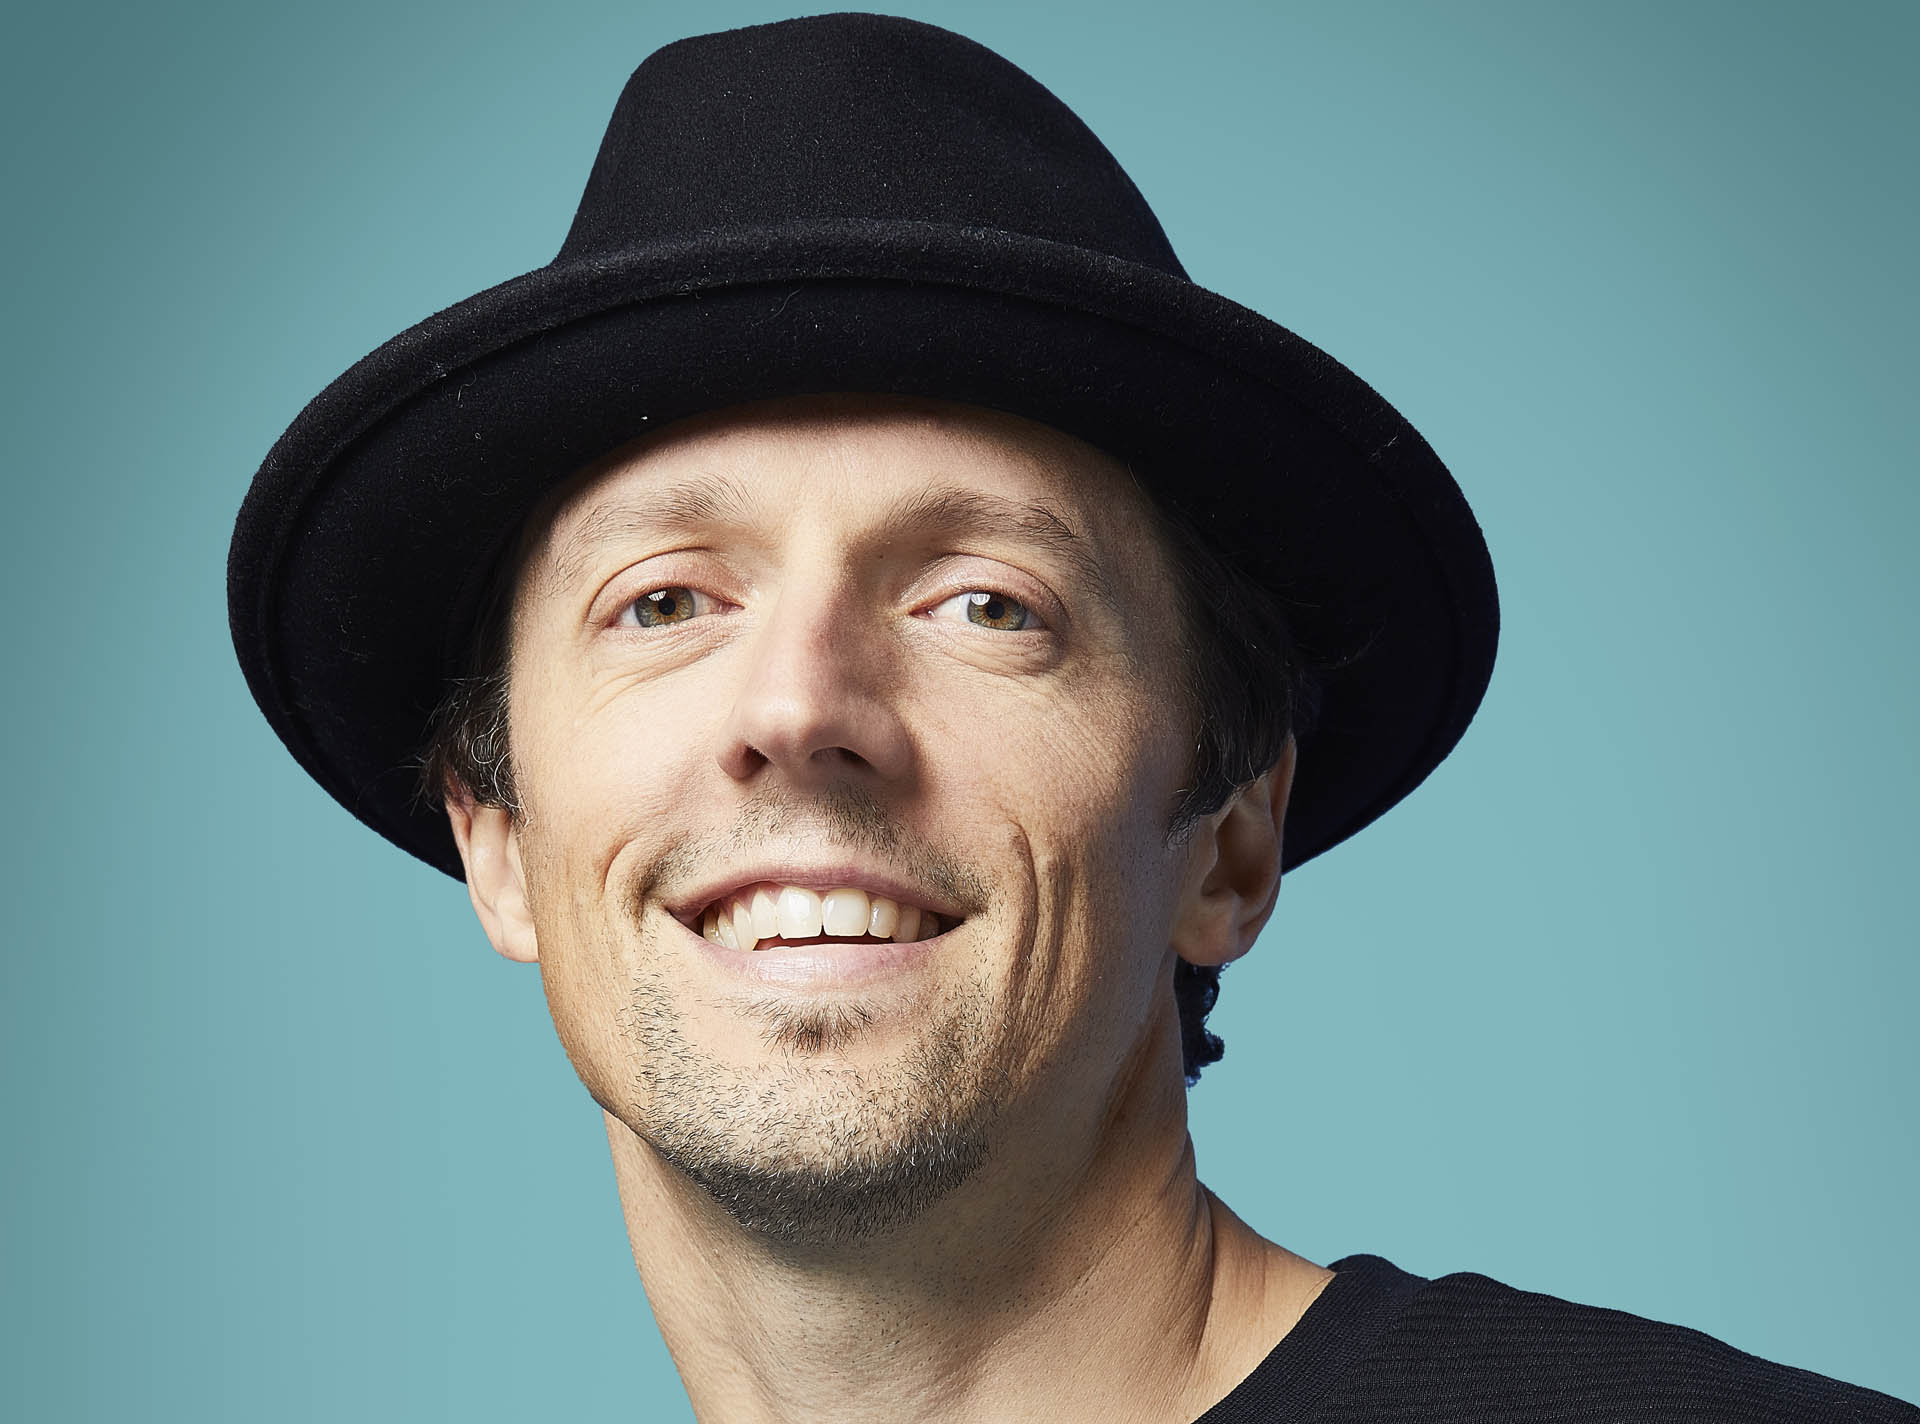 Newest song from jason mraz released - stg.